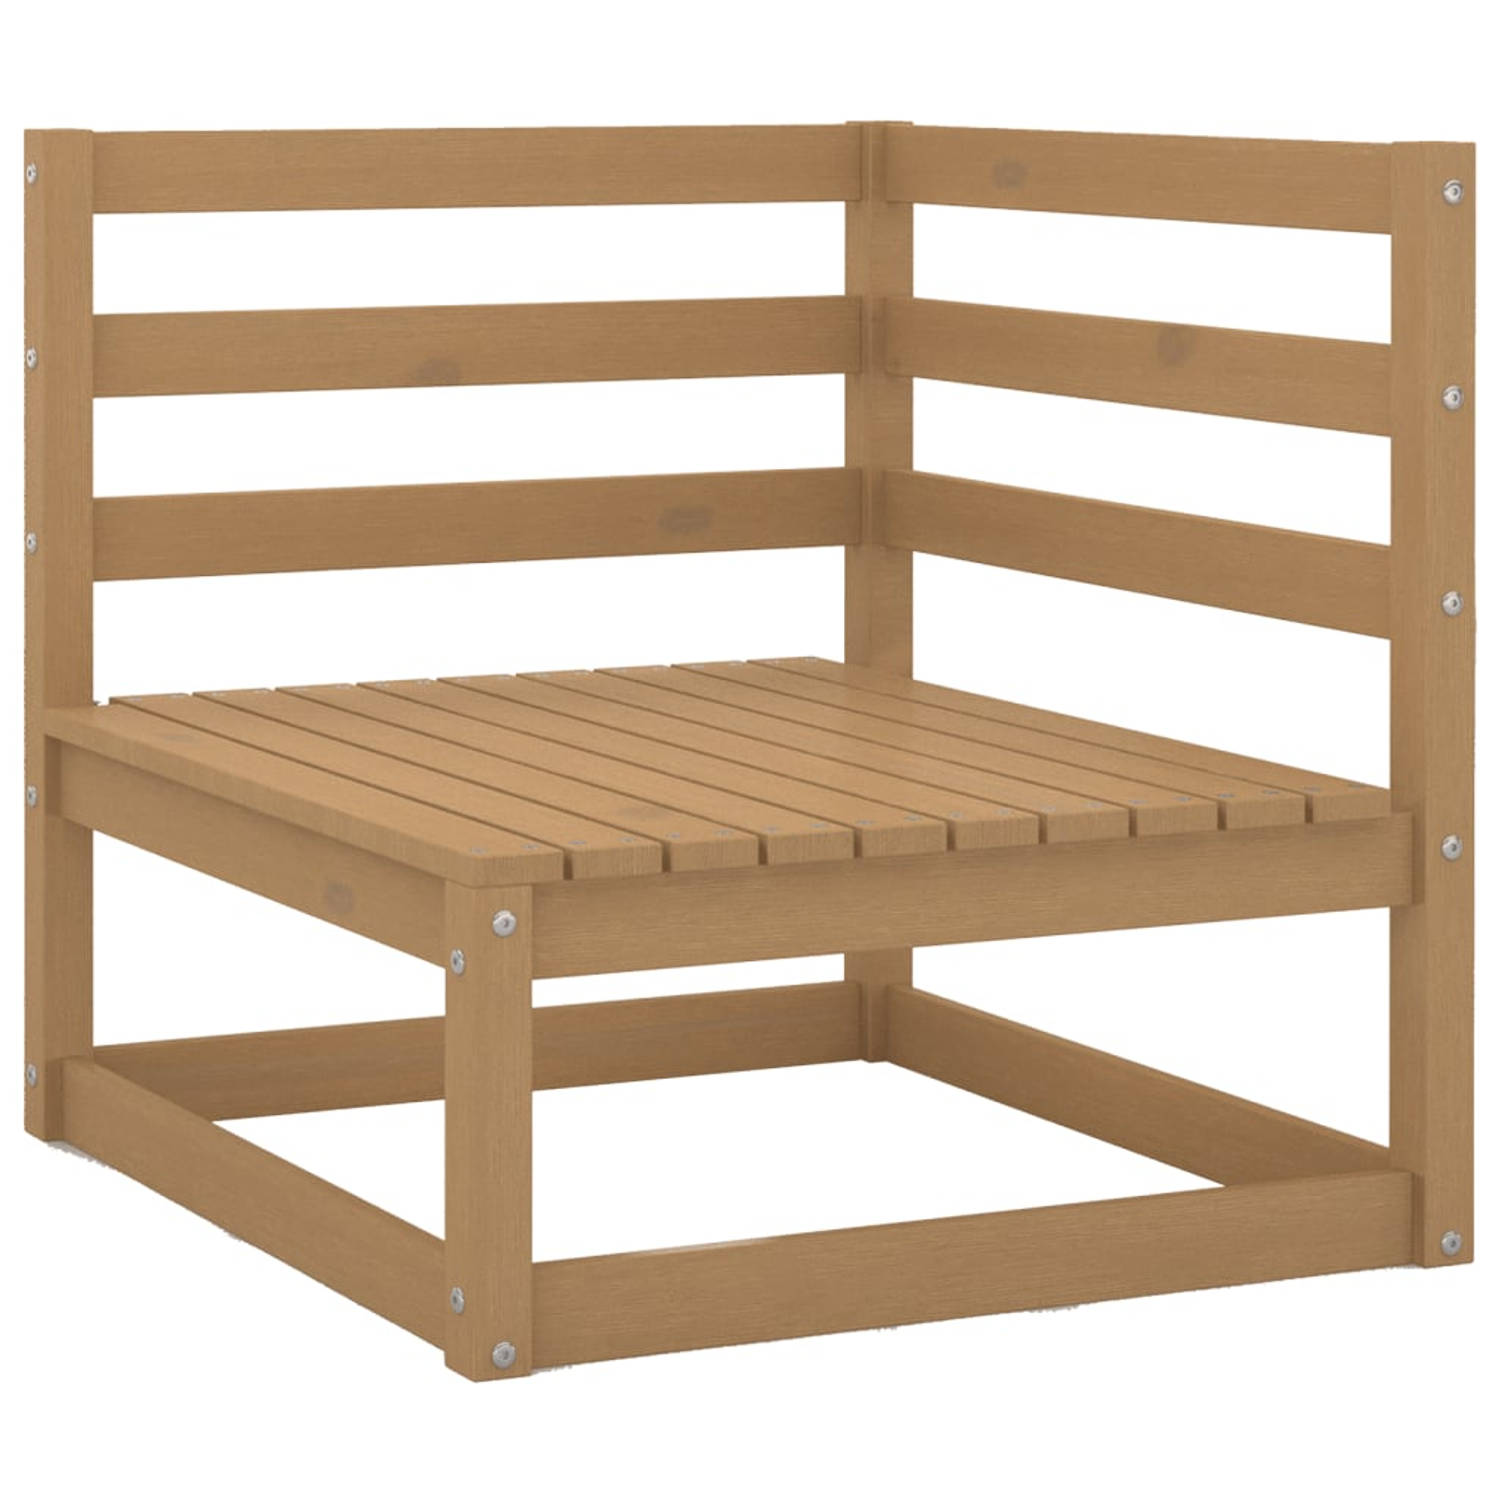 The Living Store 3-delige Loungeset massief grenenhout honingbruin - Tuinset